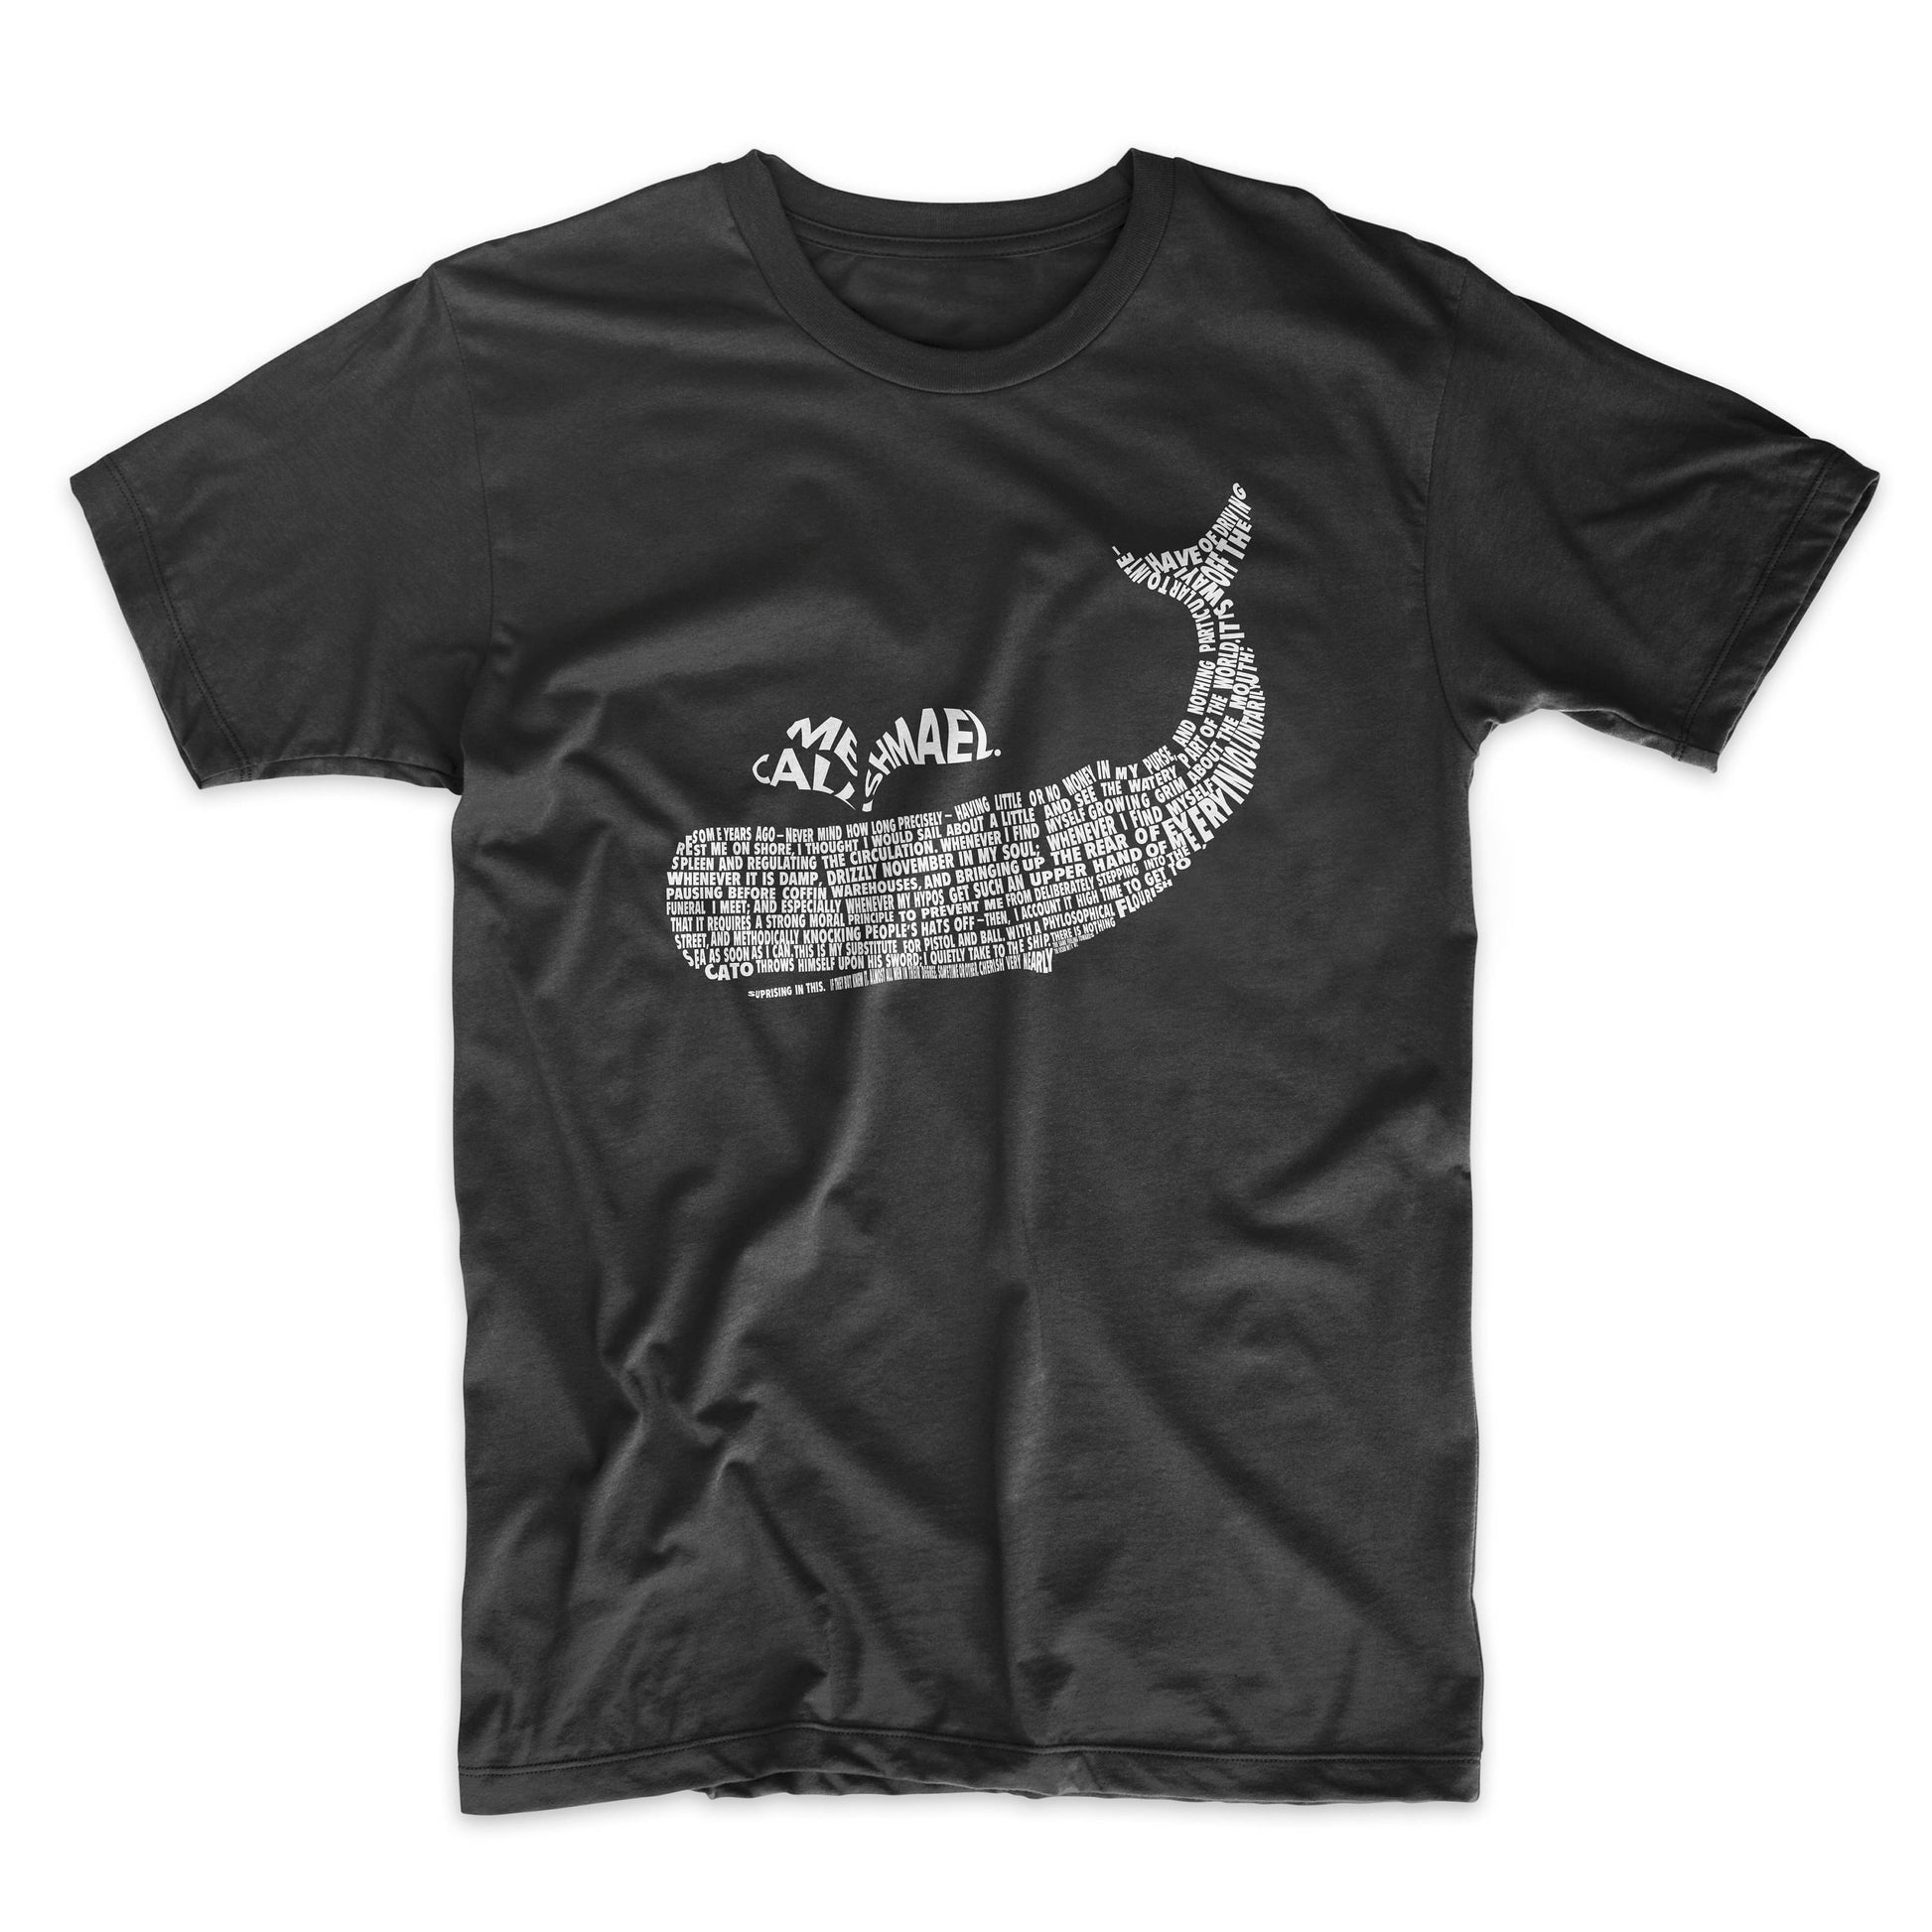 Moby Dick T-Shirt - Mighty Circus